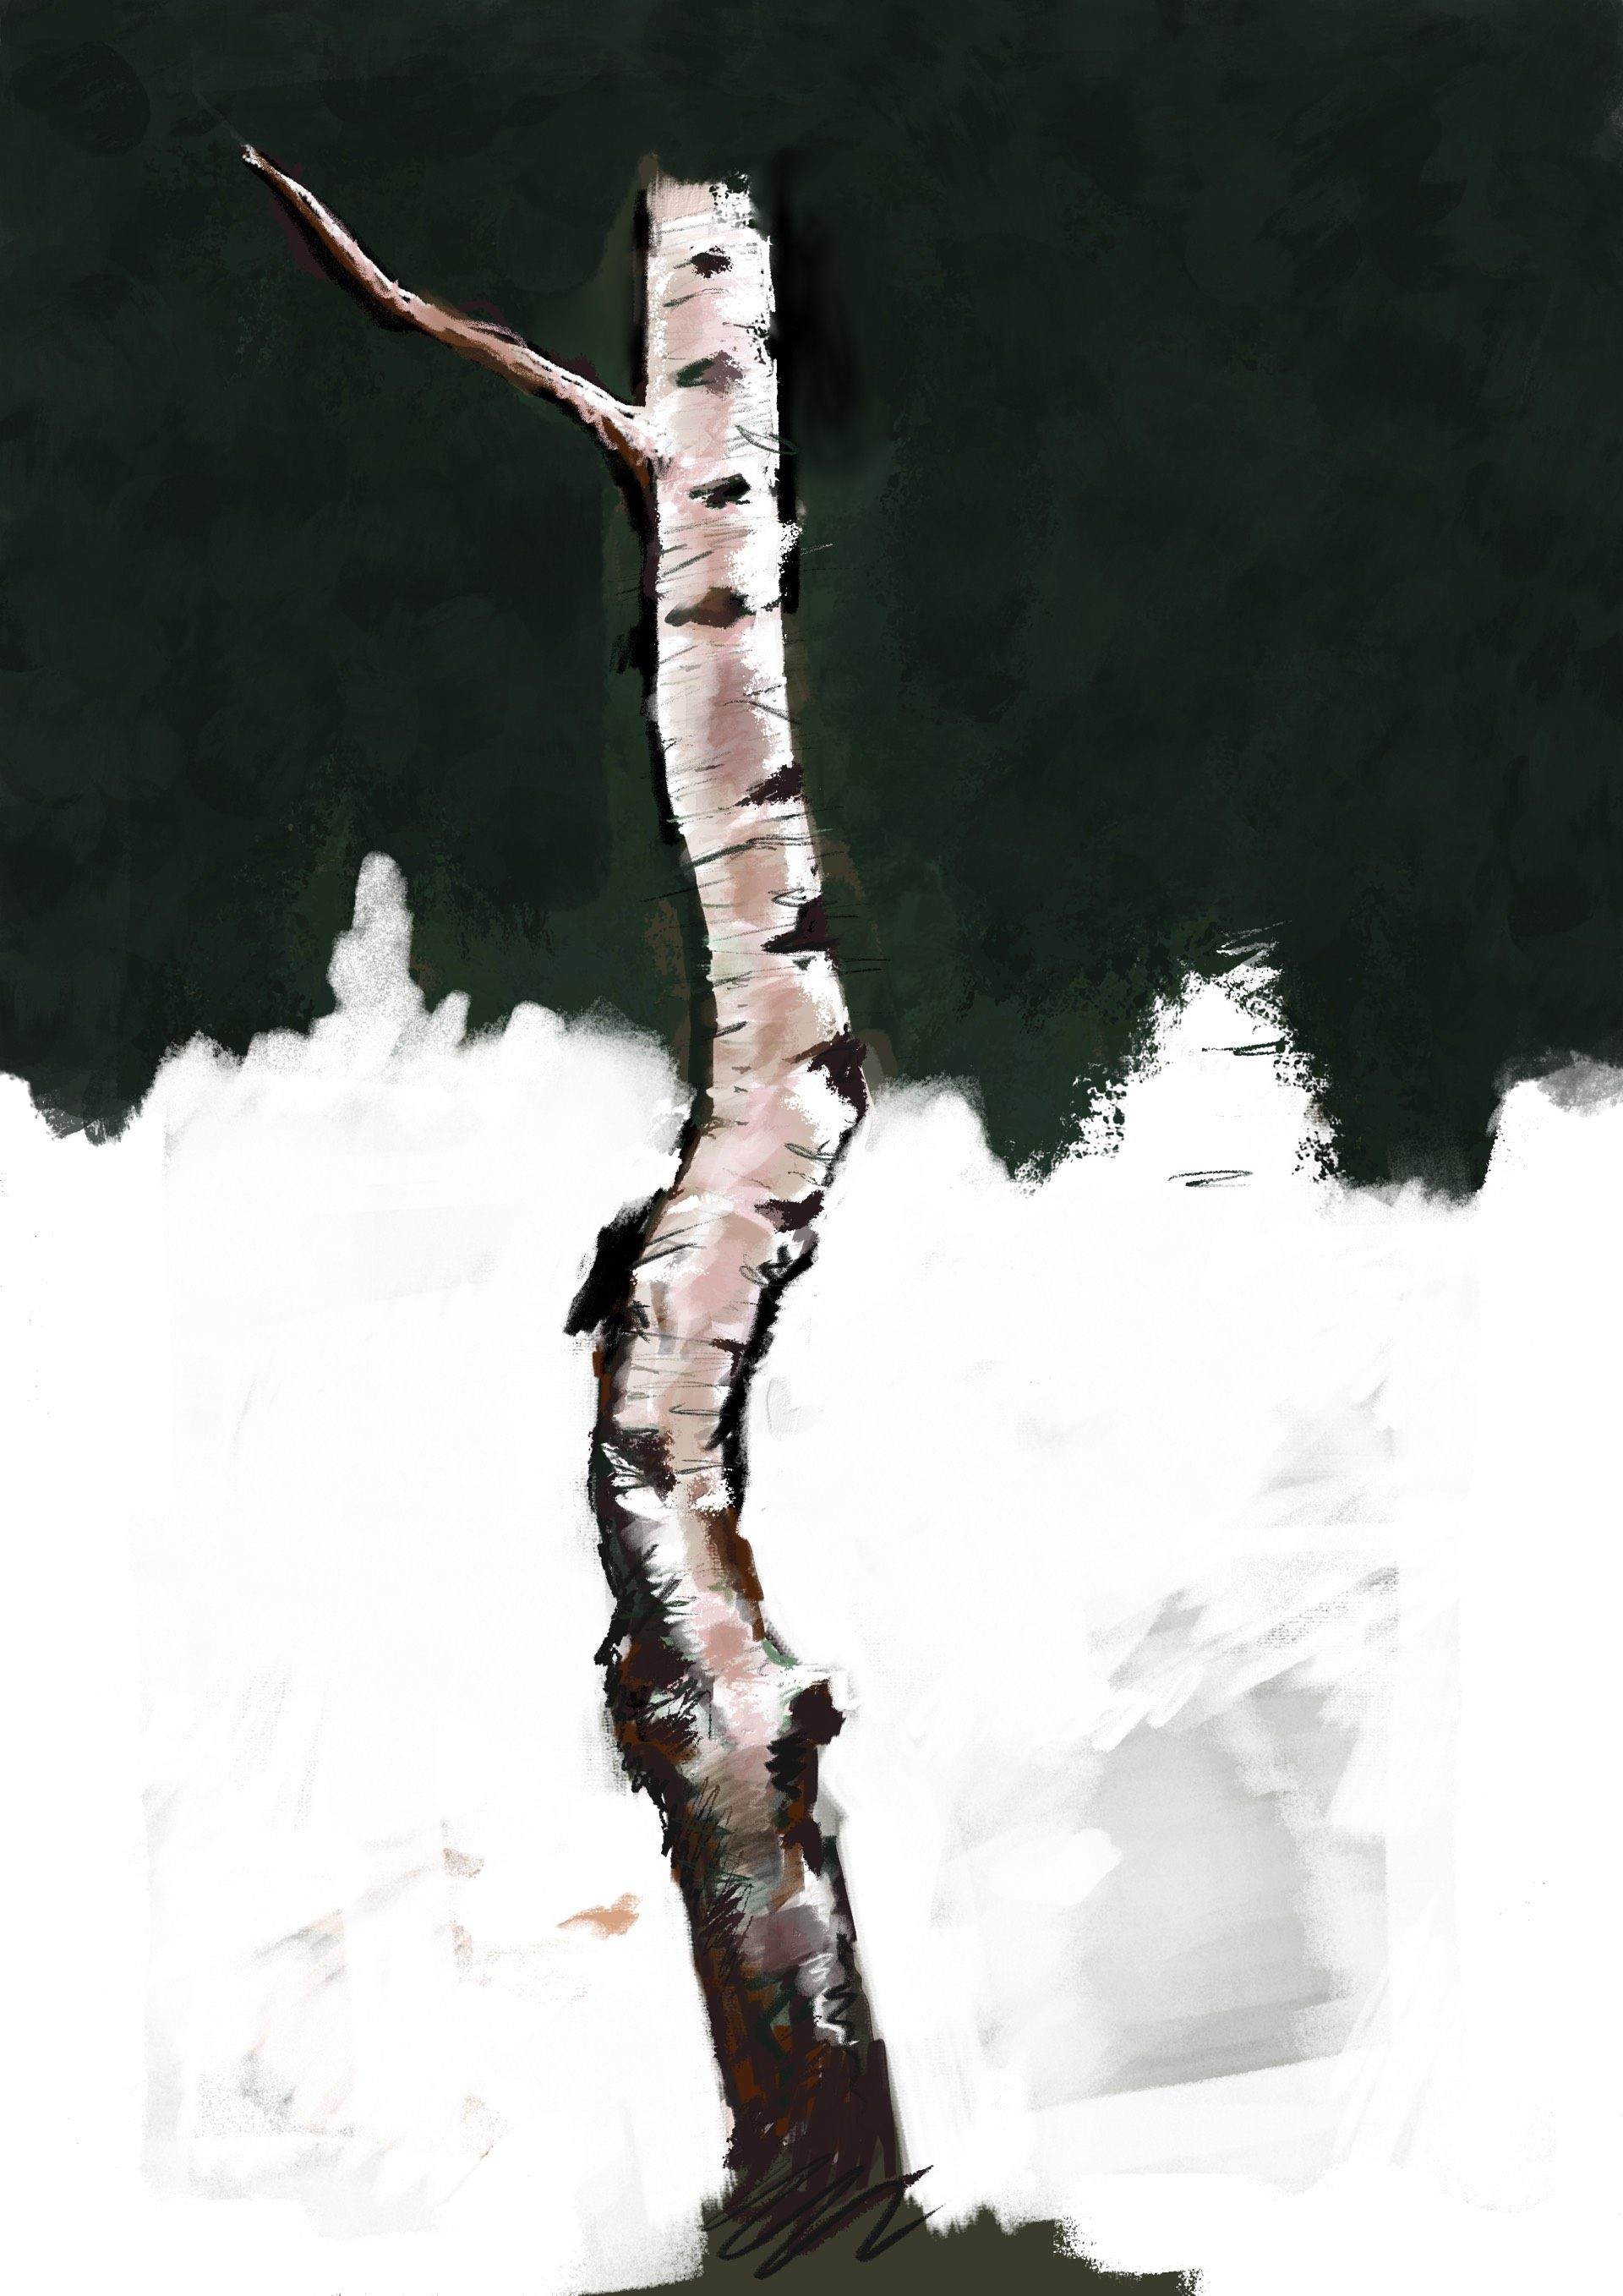 Drawing of a silver birch tree trunk